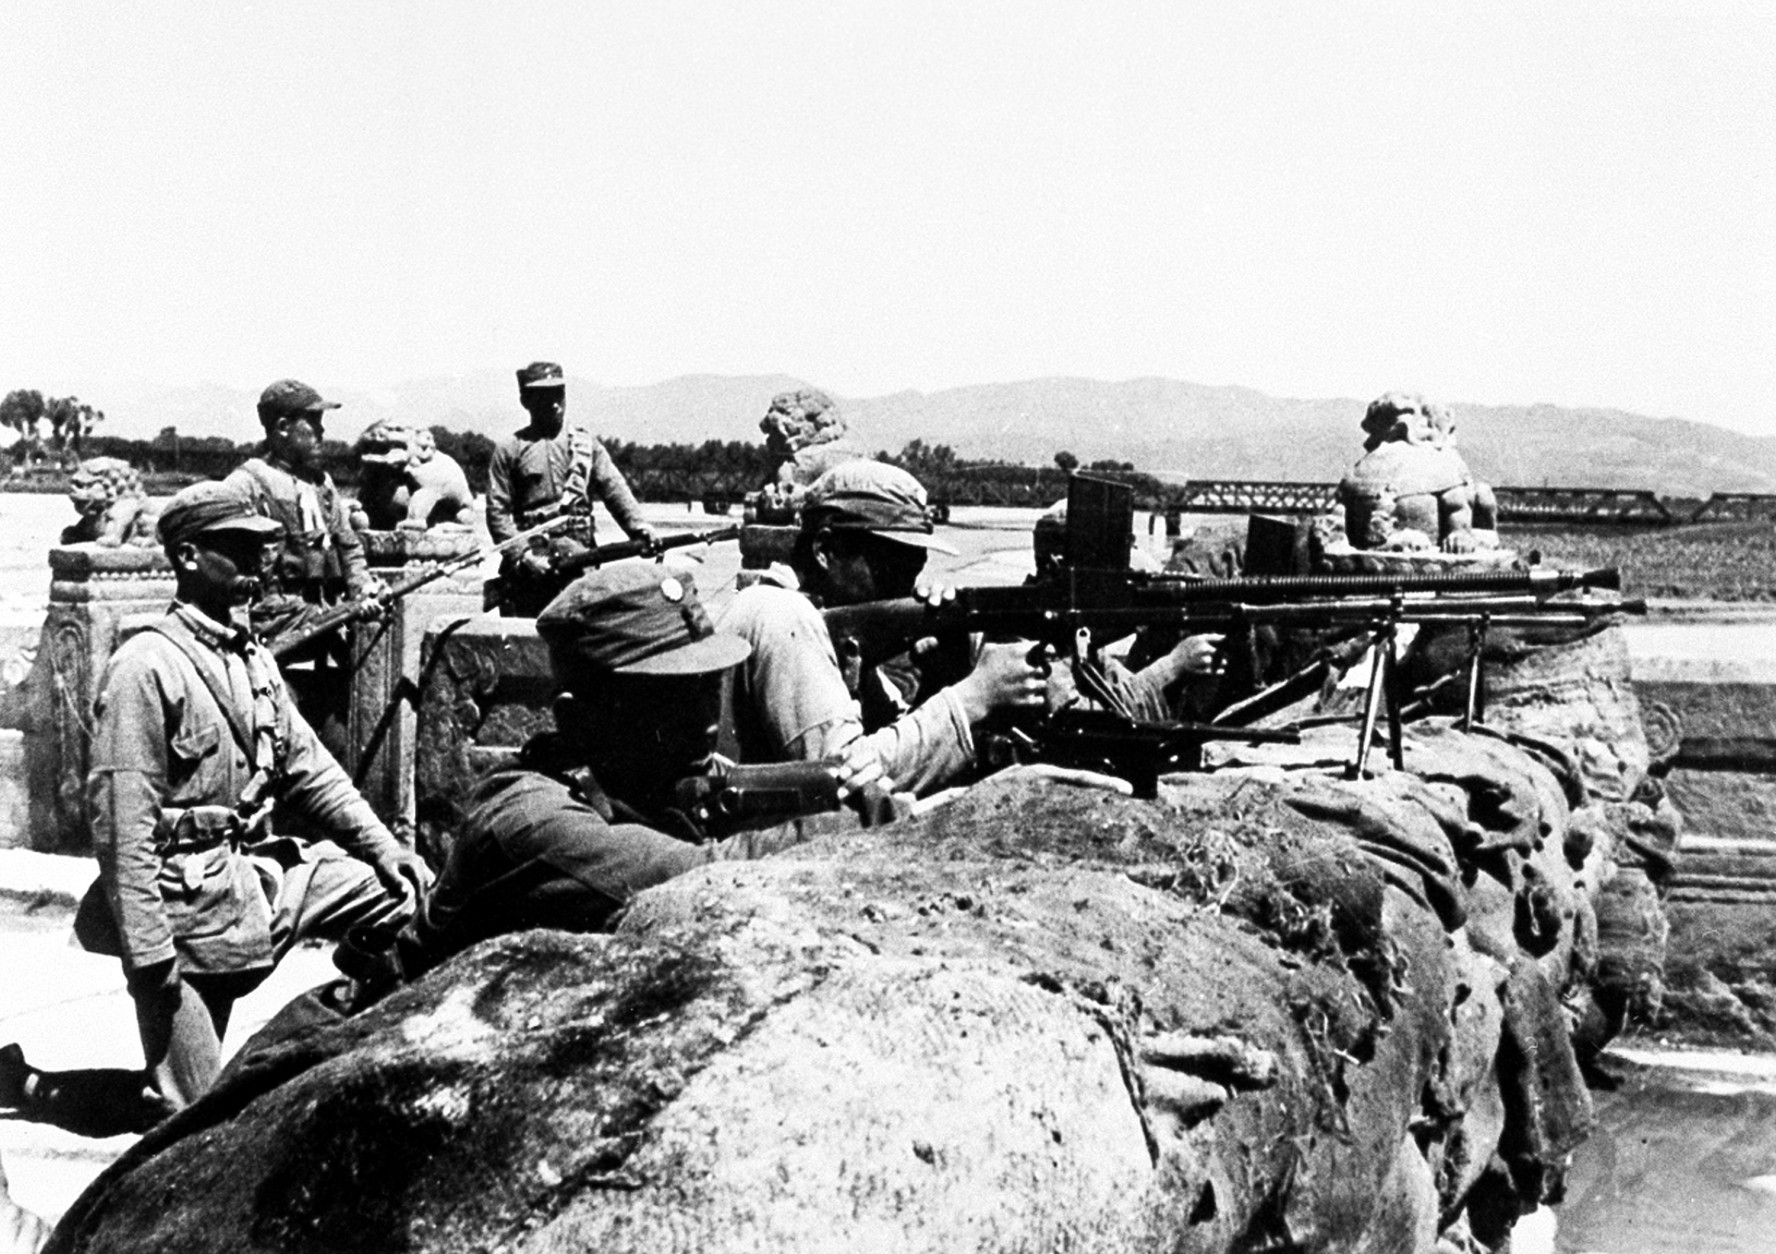 Members of the Chinese 29th Army defend the city behind a hastily constructed sandbag barricade on the Marco Polo Bridge, 14 miles southwest of Pieping, China, against Japanese attackers on July 8, 1937.  On July 7, Chinese troops fired on Japanese troops at the Marco Polo bridge, a clash between the two countries that led to the Second Sino Japanese War.  (AP Photo)